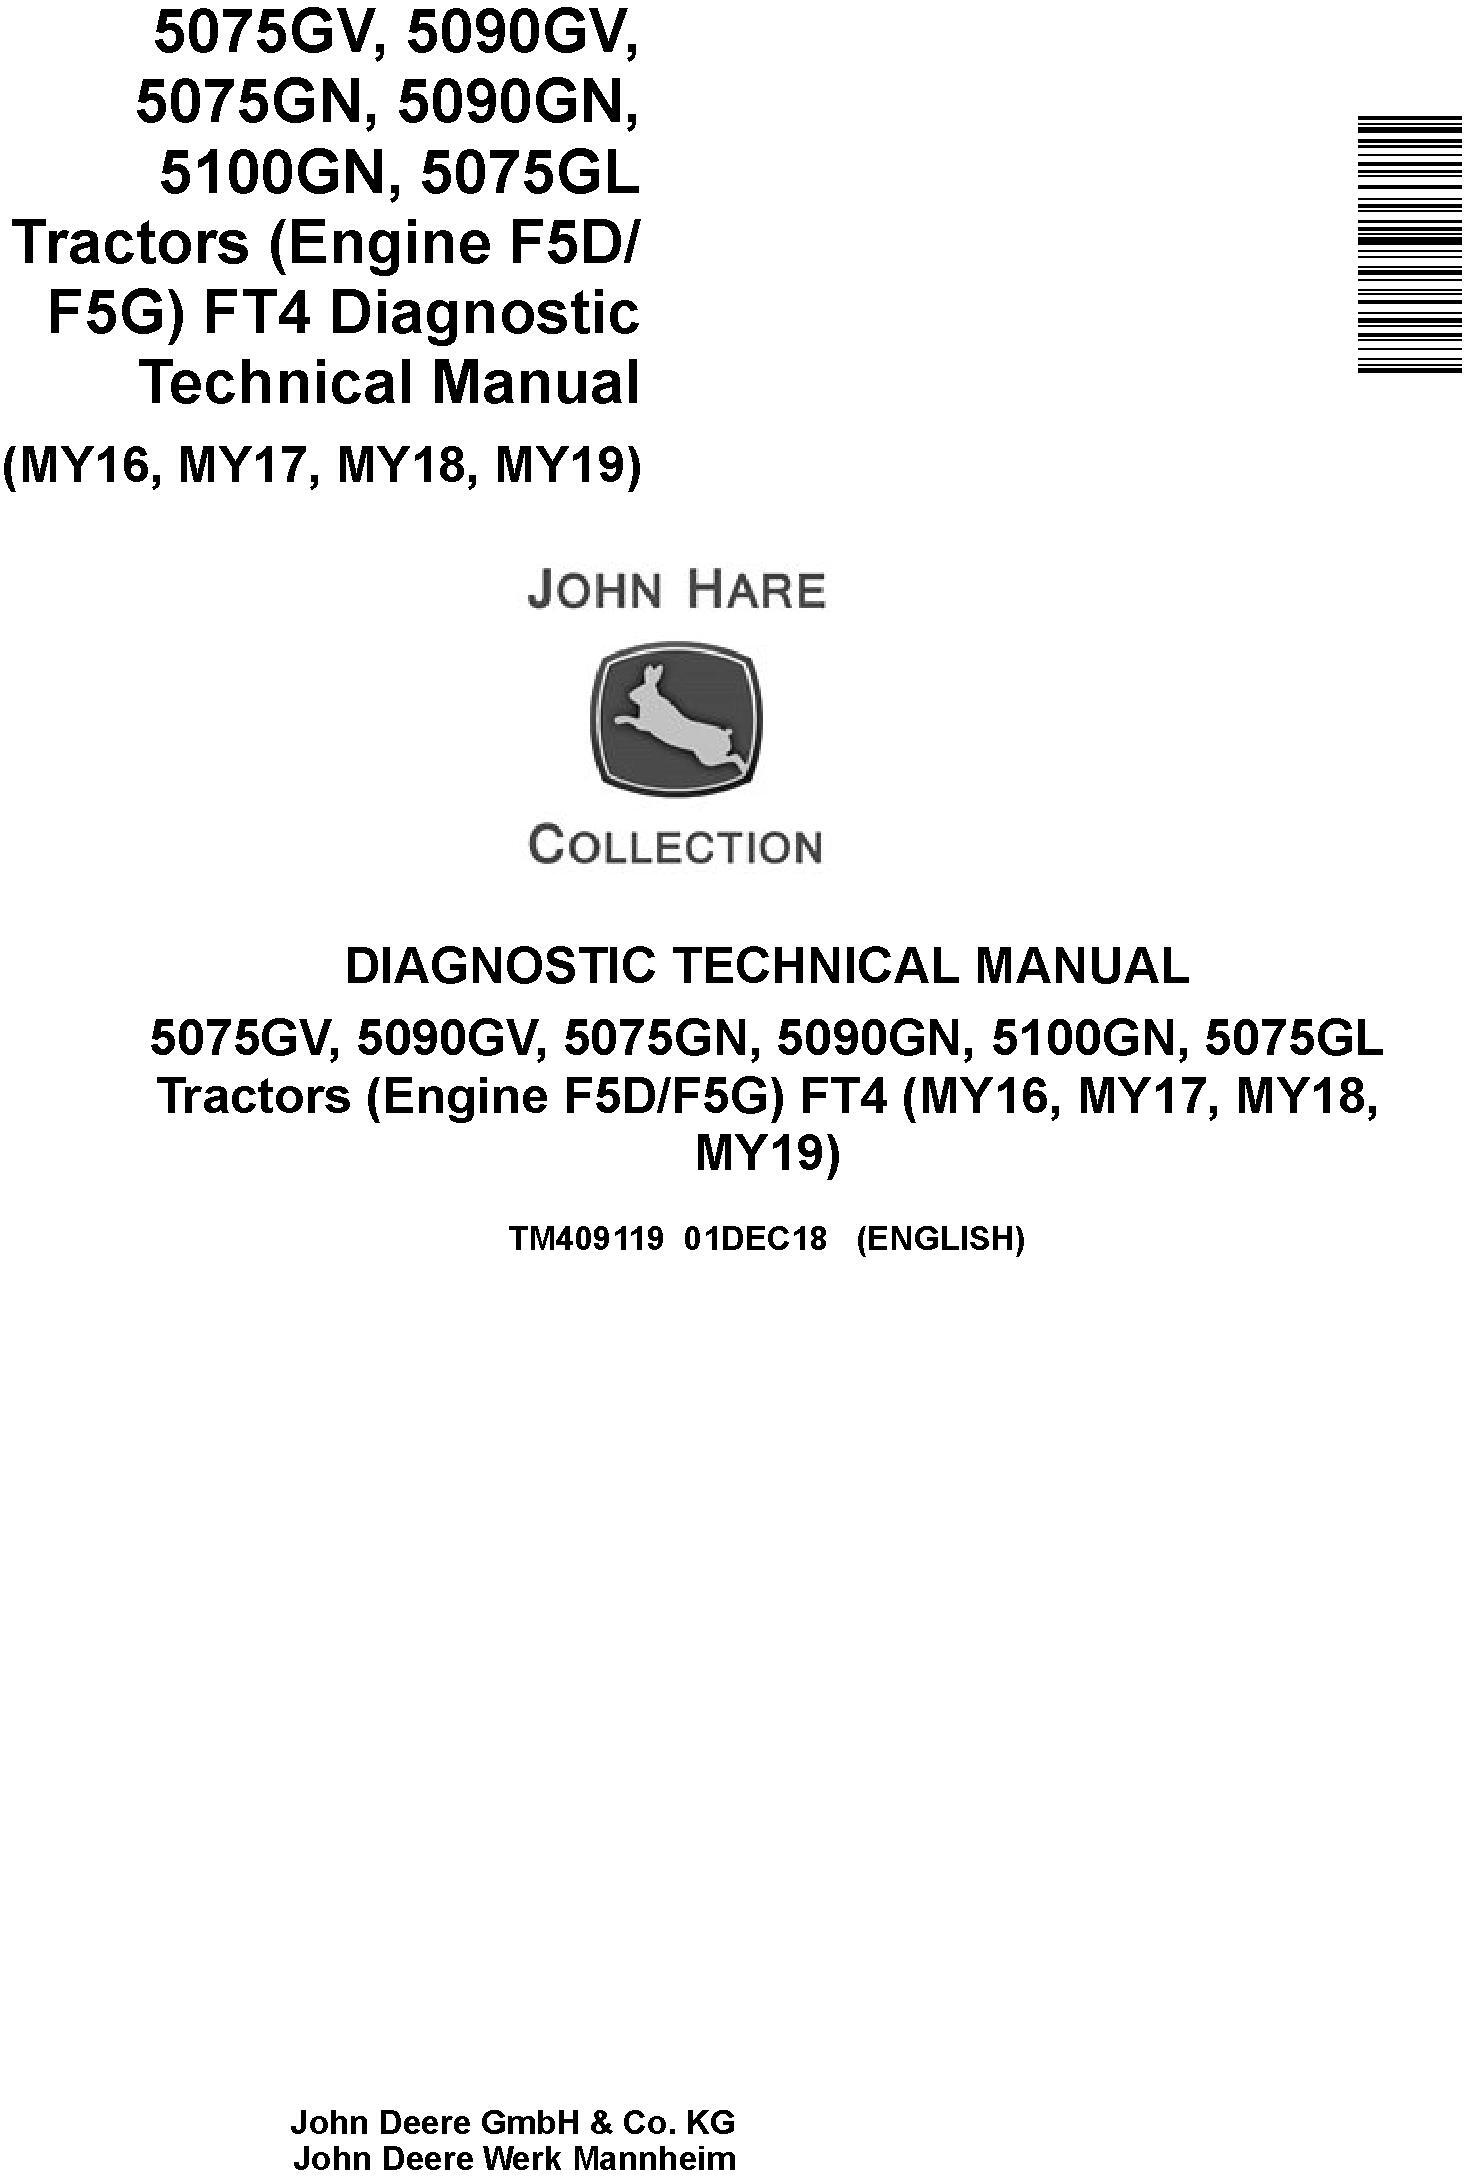 John Deere 5075G to 5100G MY2016-19 Tractor Diagnostic Technical Manual TM409119